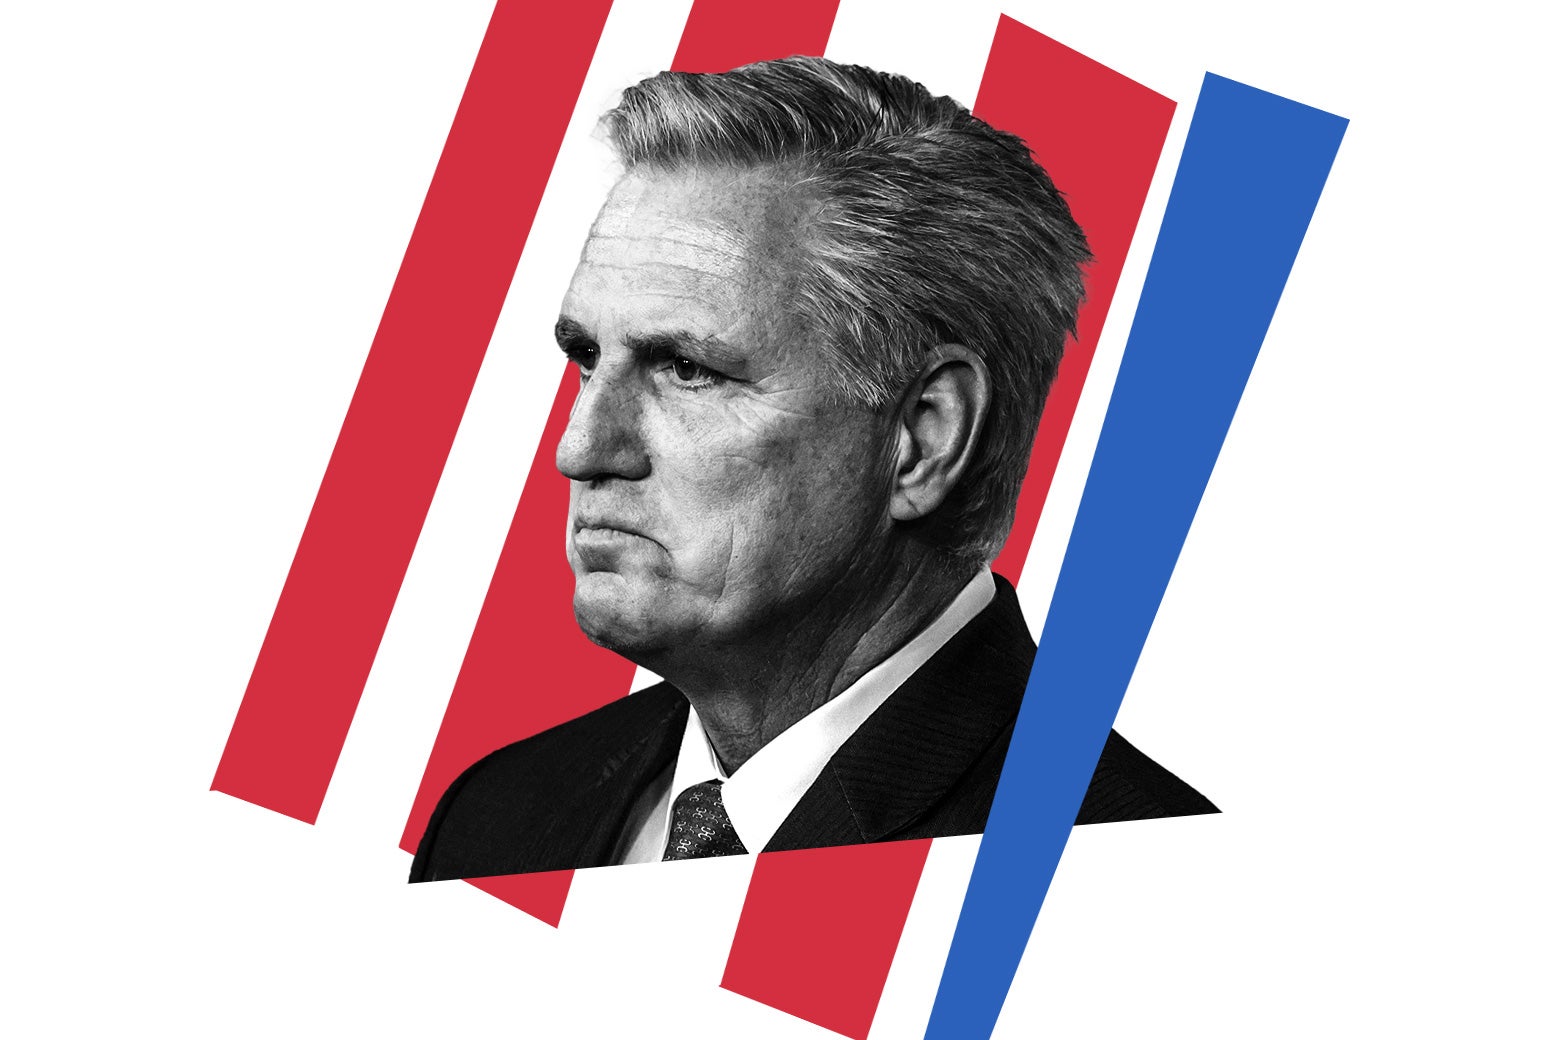 Kevin McCarthy's face floating within a mass of three red shapes and one blue shape